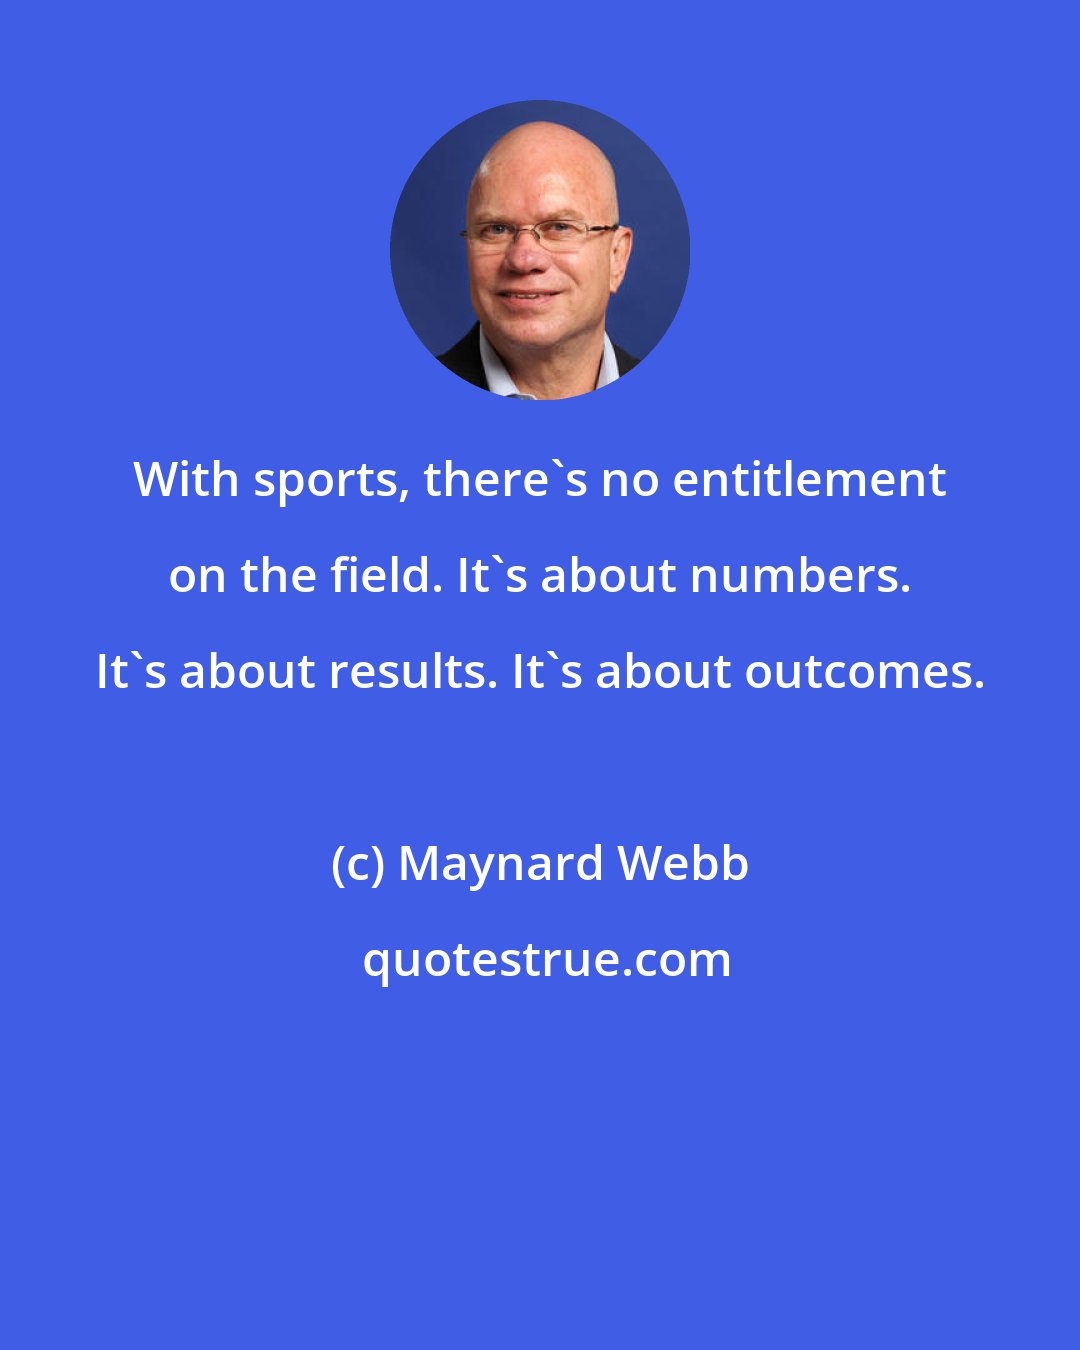 Maynard Webb: With sports, there's no entitlement on the field. It's about numbers. It's about results. It's about outcomes.